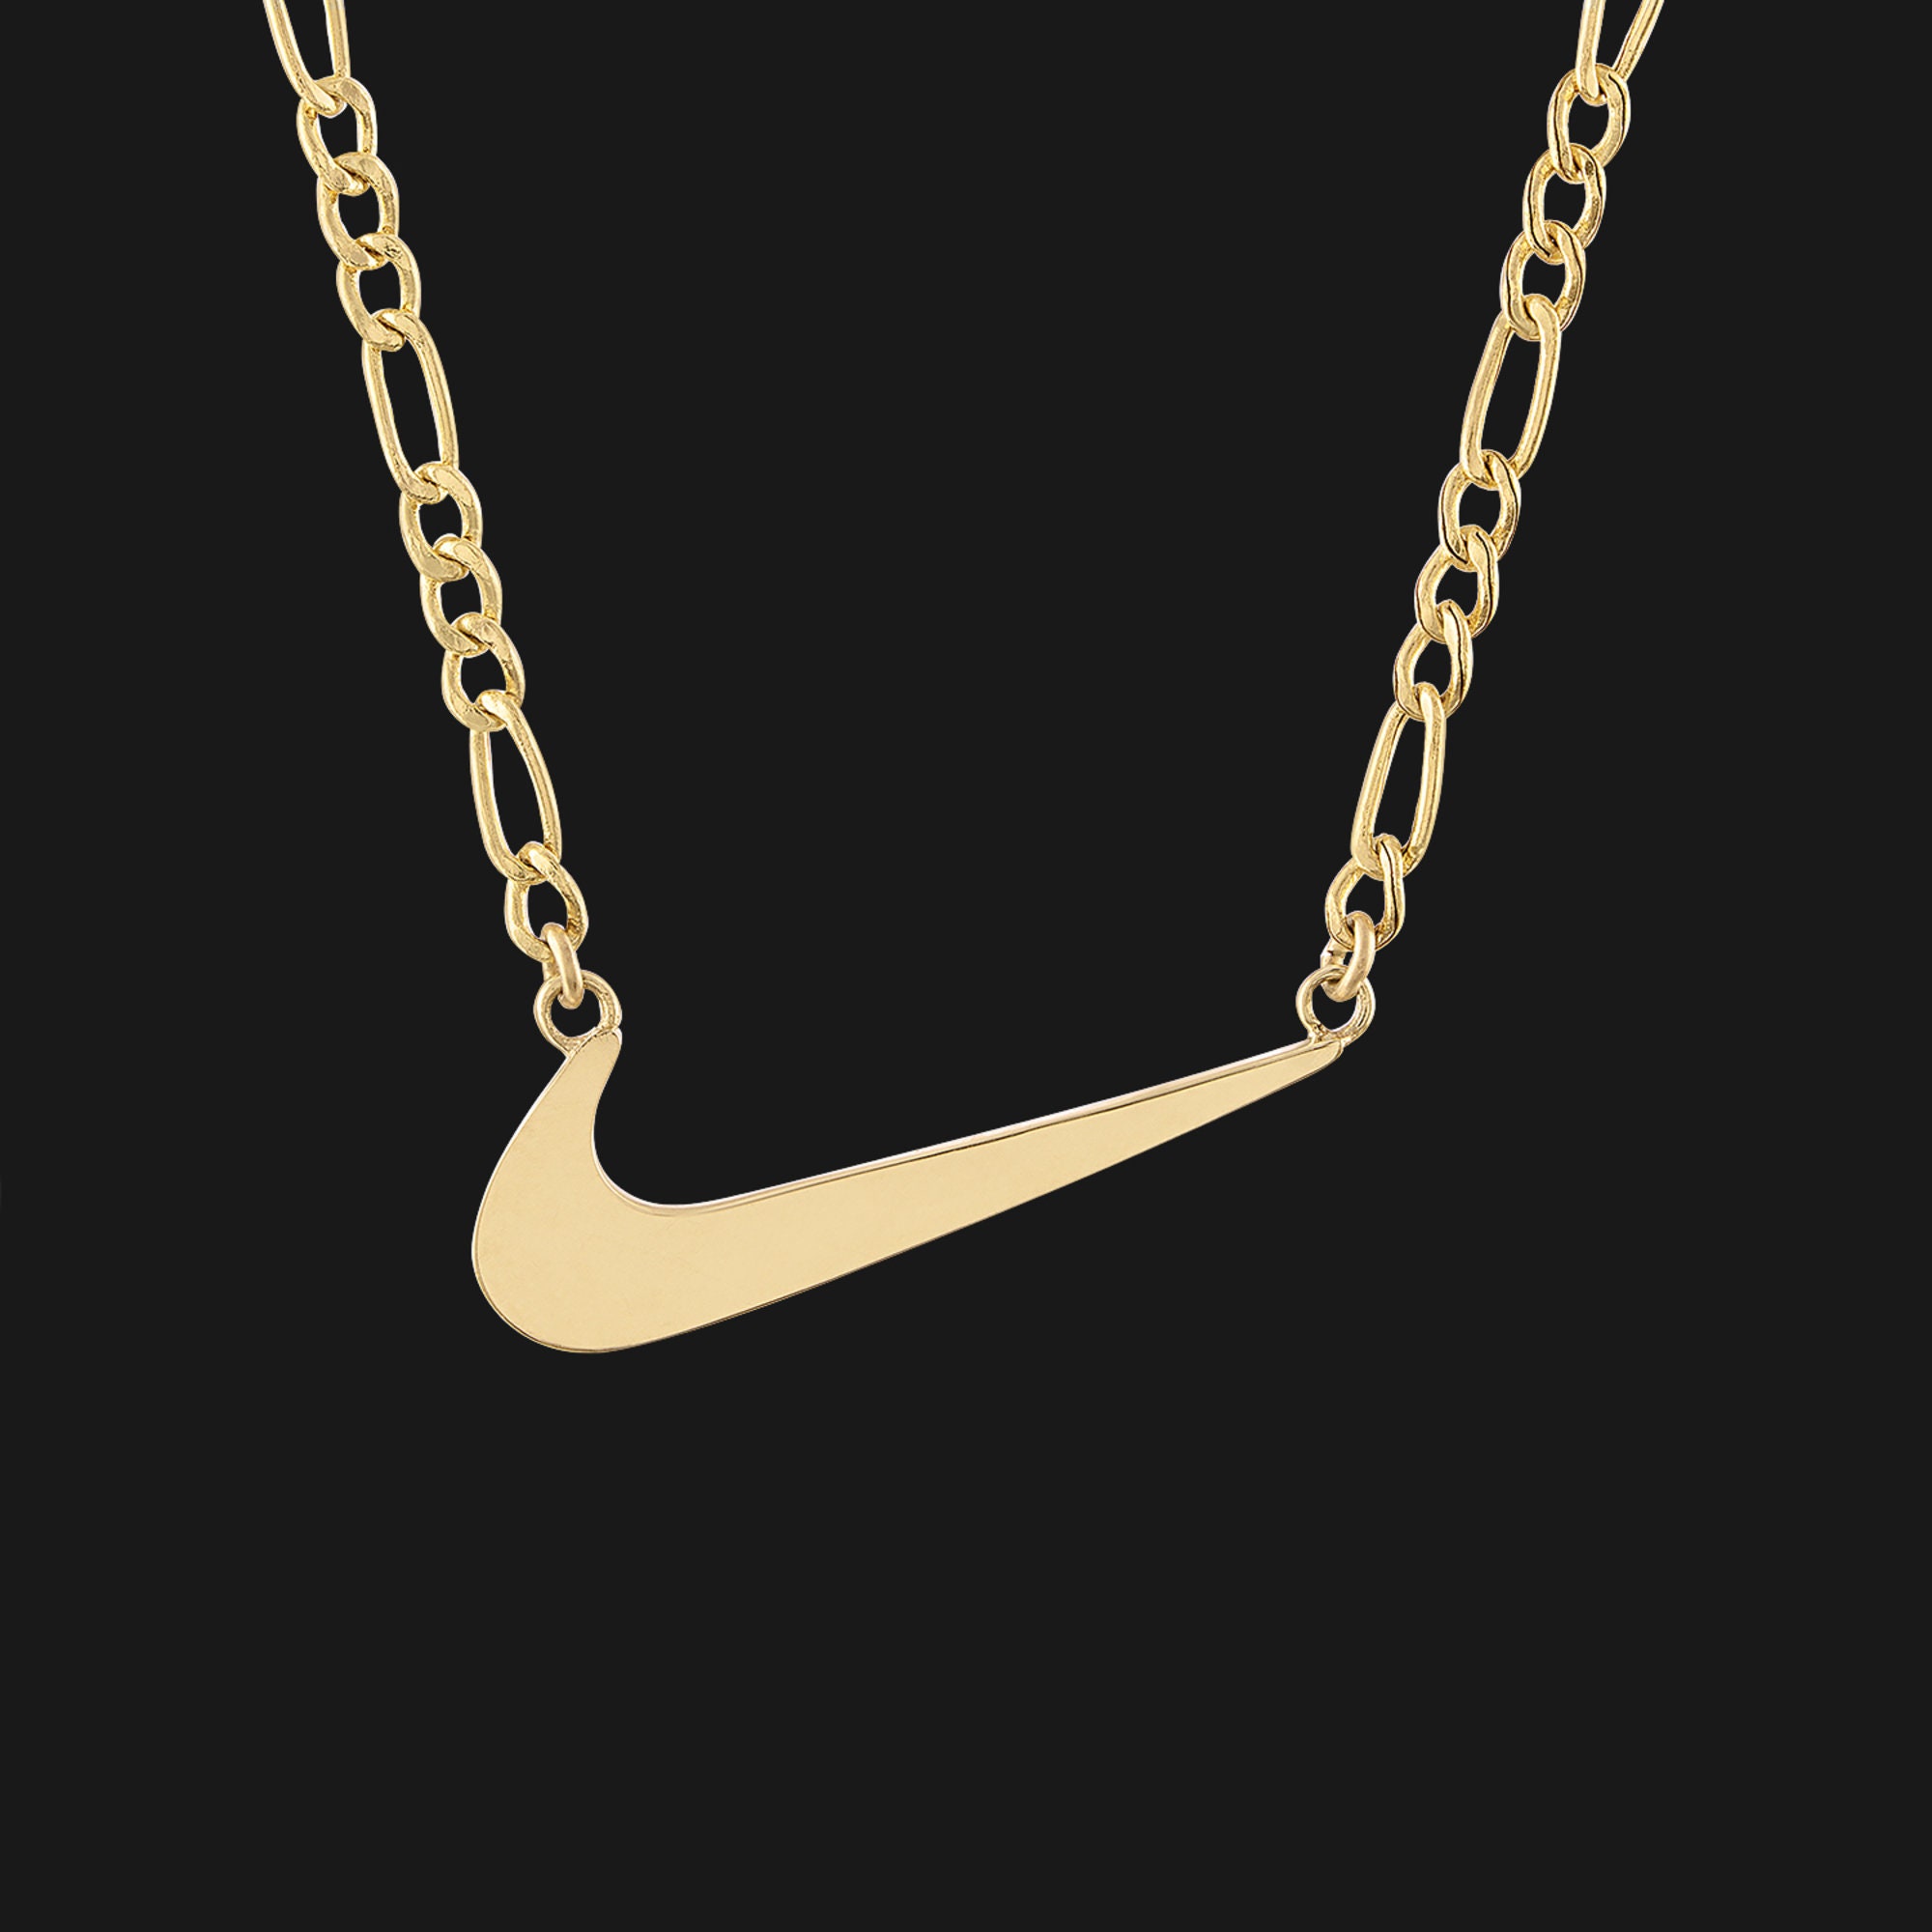 Gold Nike Necklace